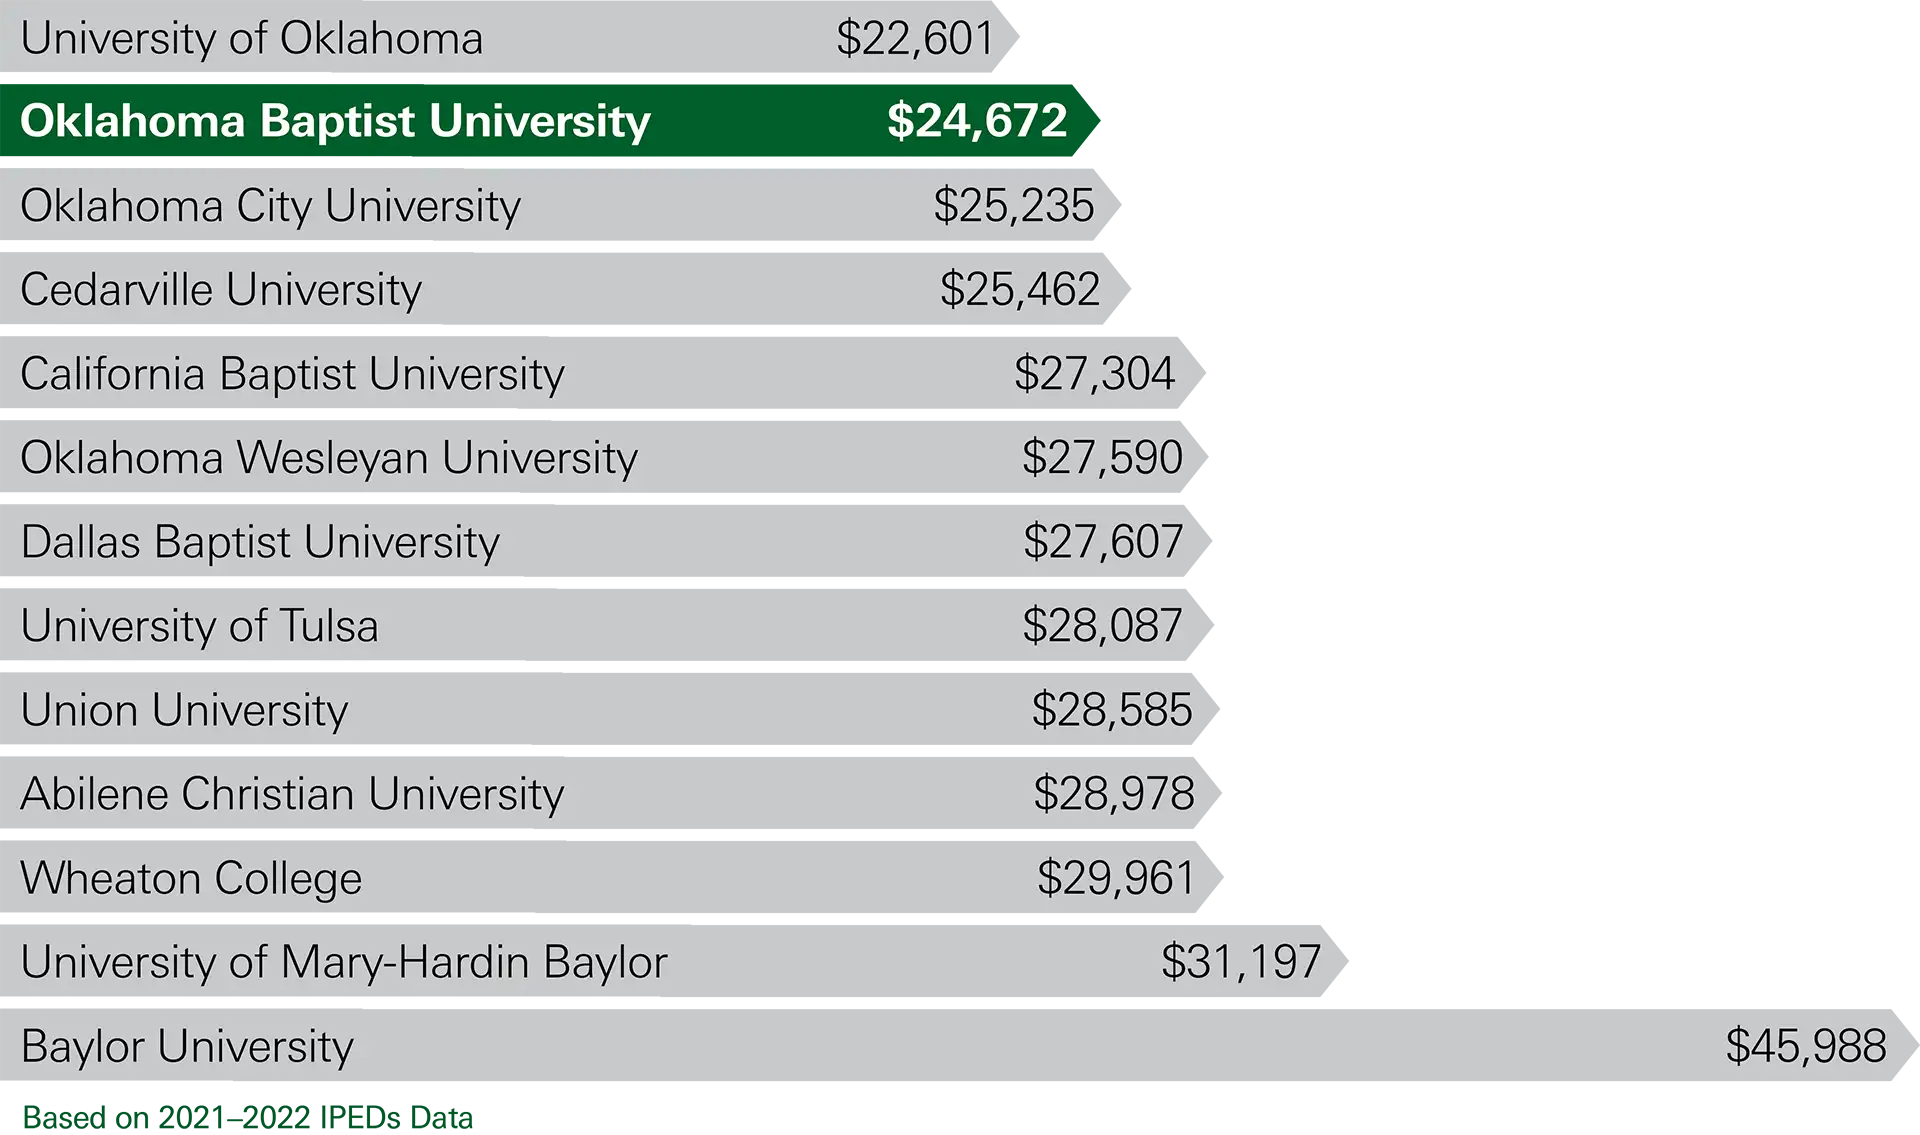 Of the universities shown, OBU is one of the most affordable options with a net price of $24,672. The lowest listed option is the University of Oklahoma at $22,601 and the highest is Baylor University at $45,998.